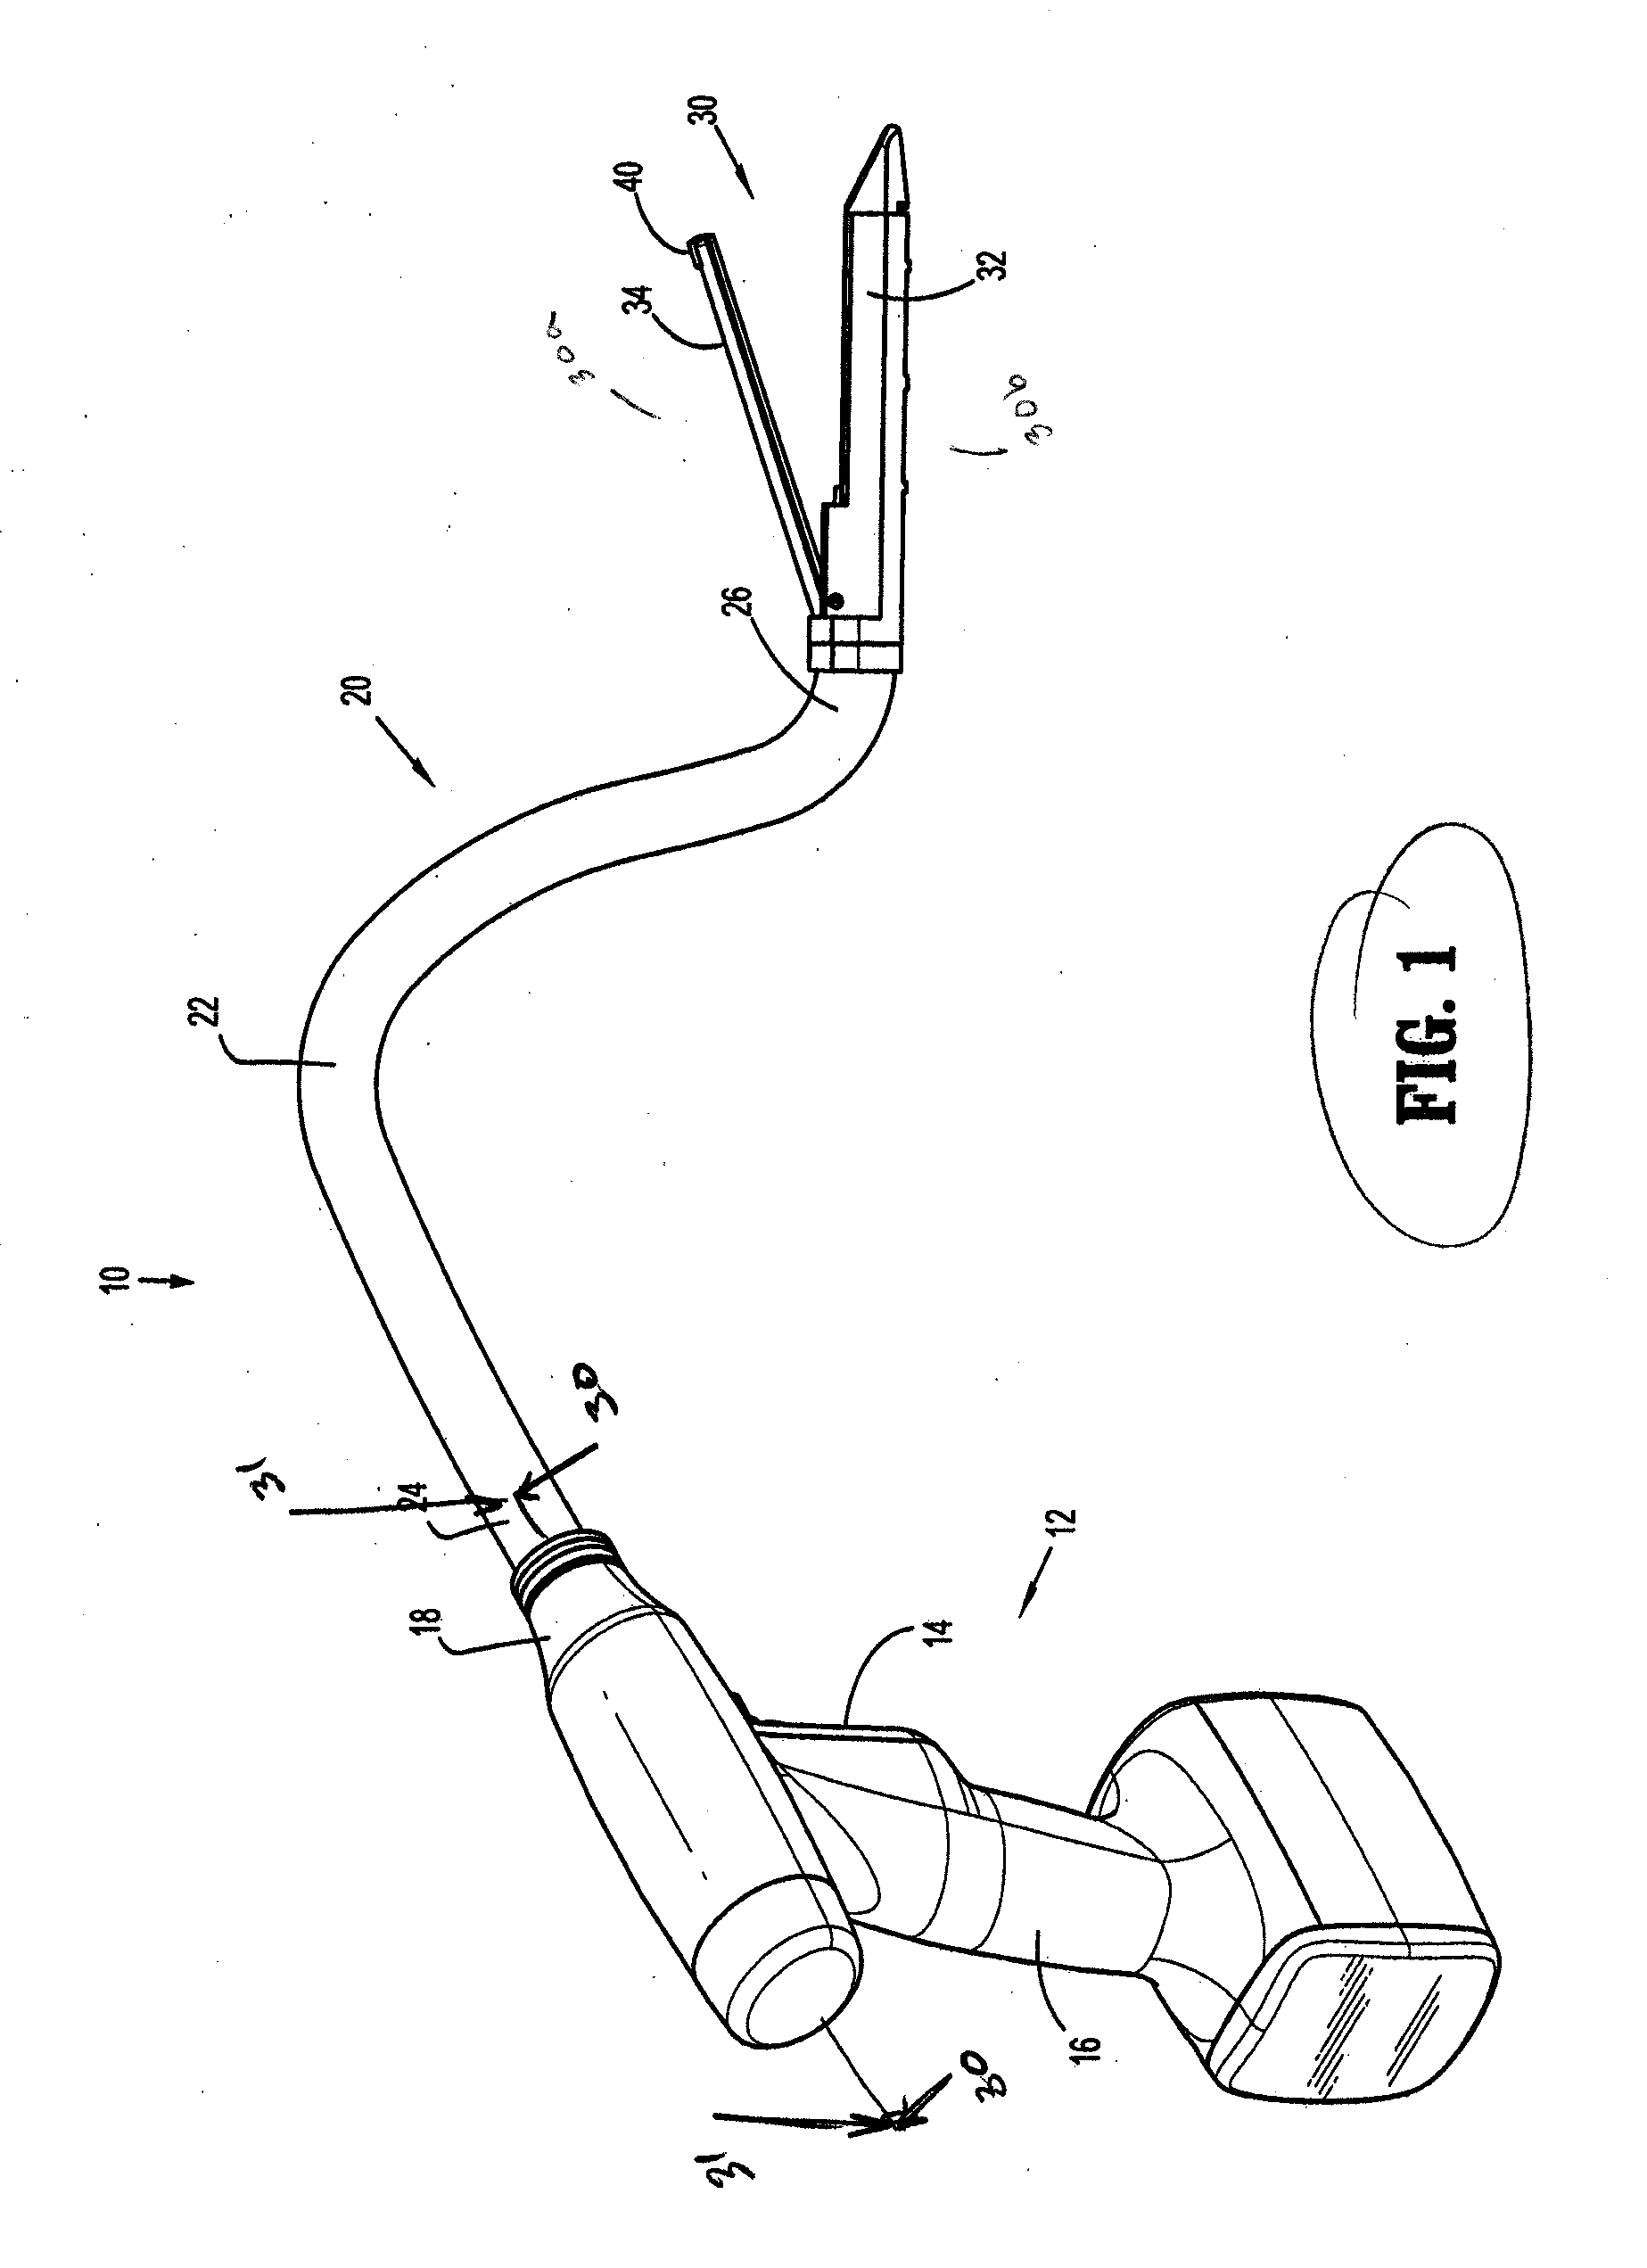 Surgical Apparatus and Method for Endoluminal Surgery